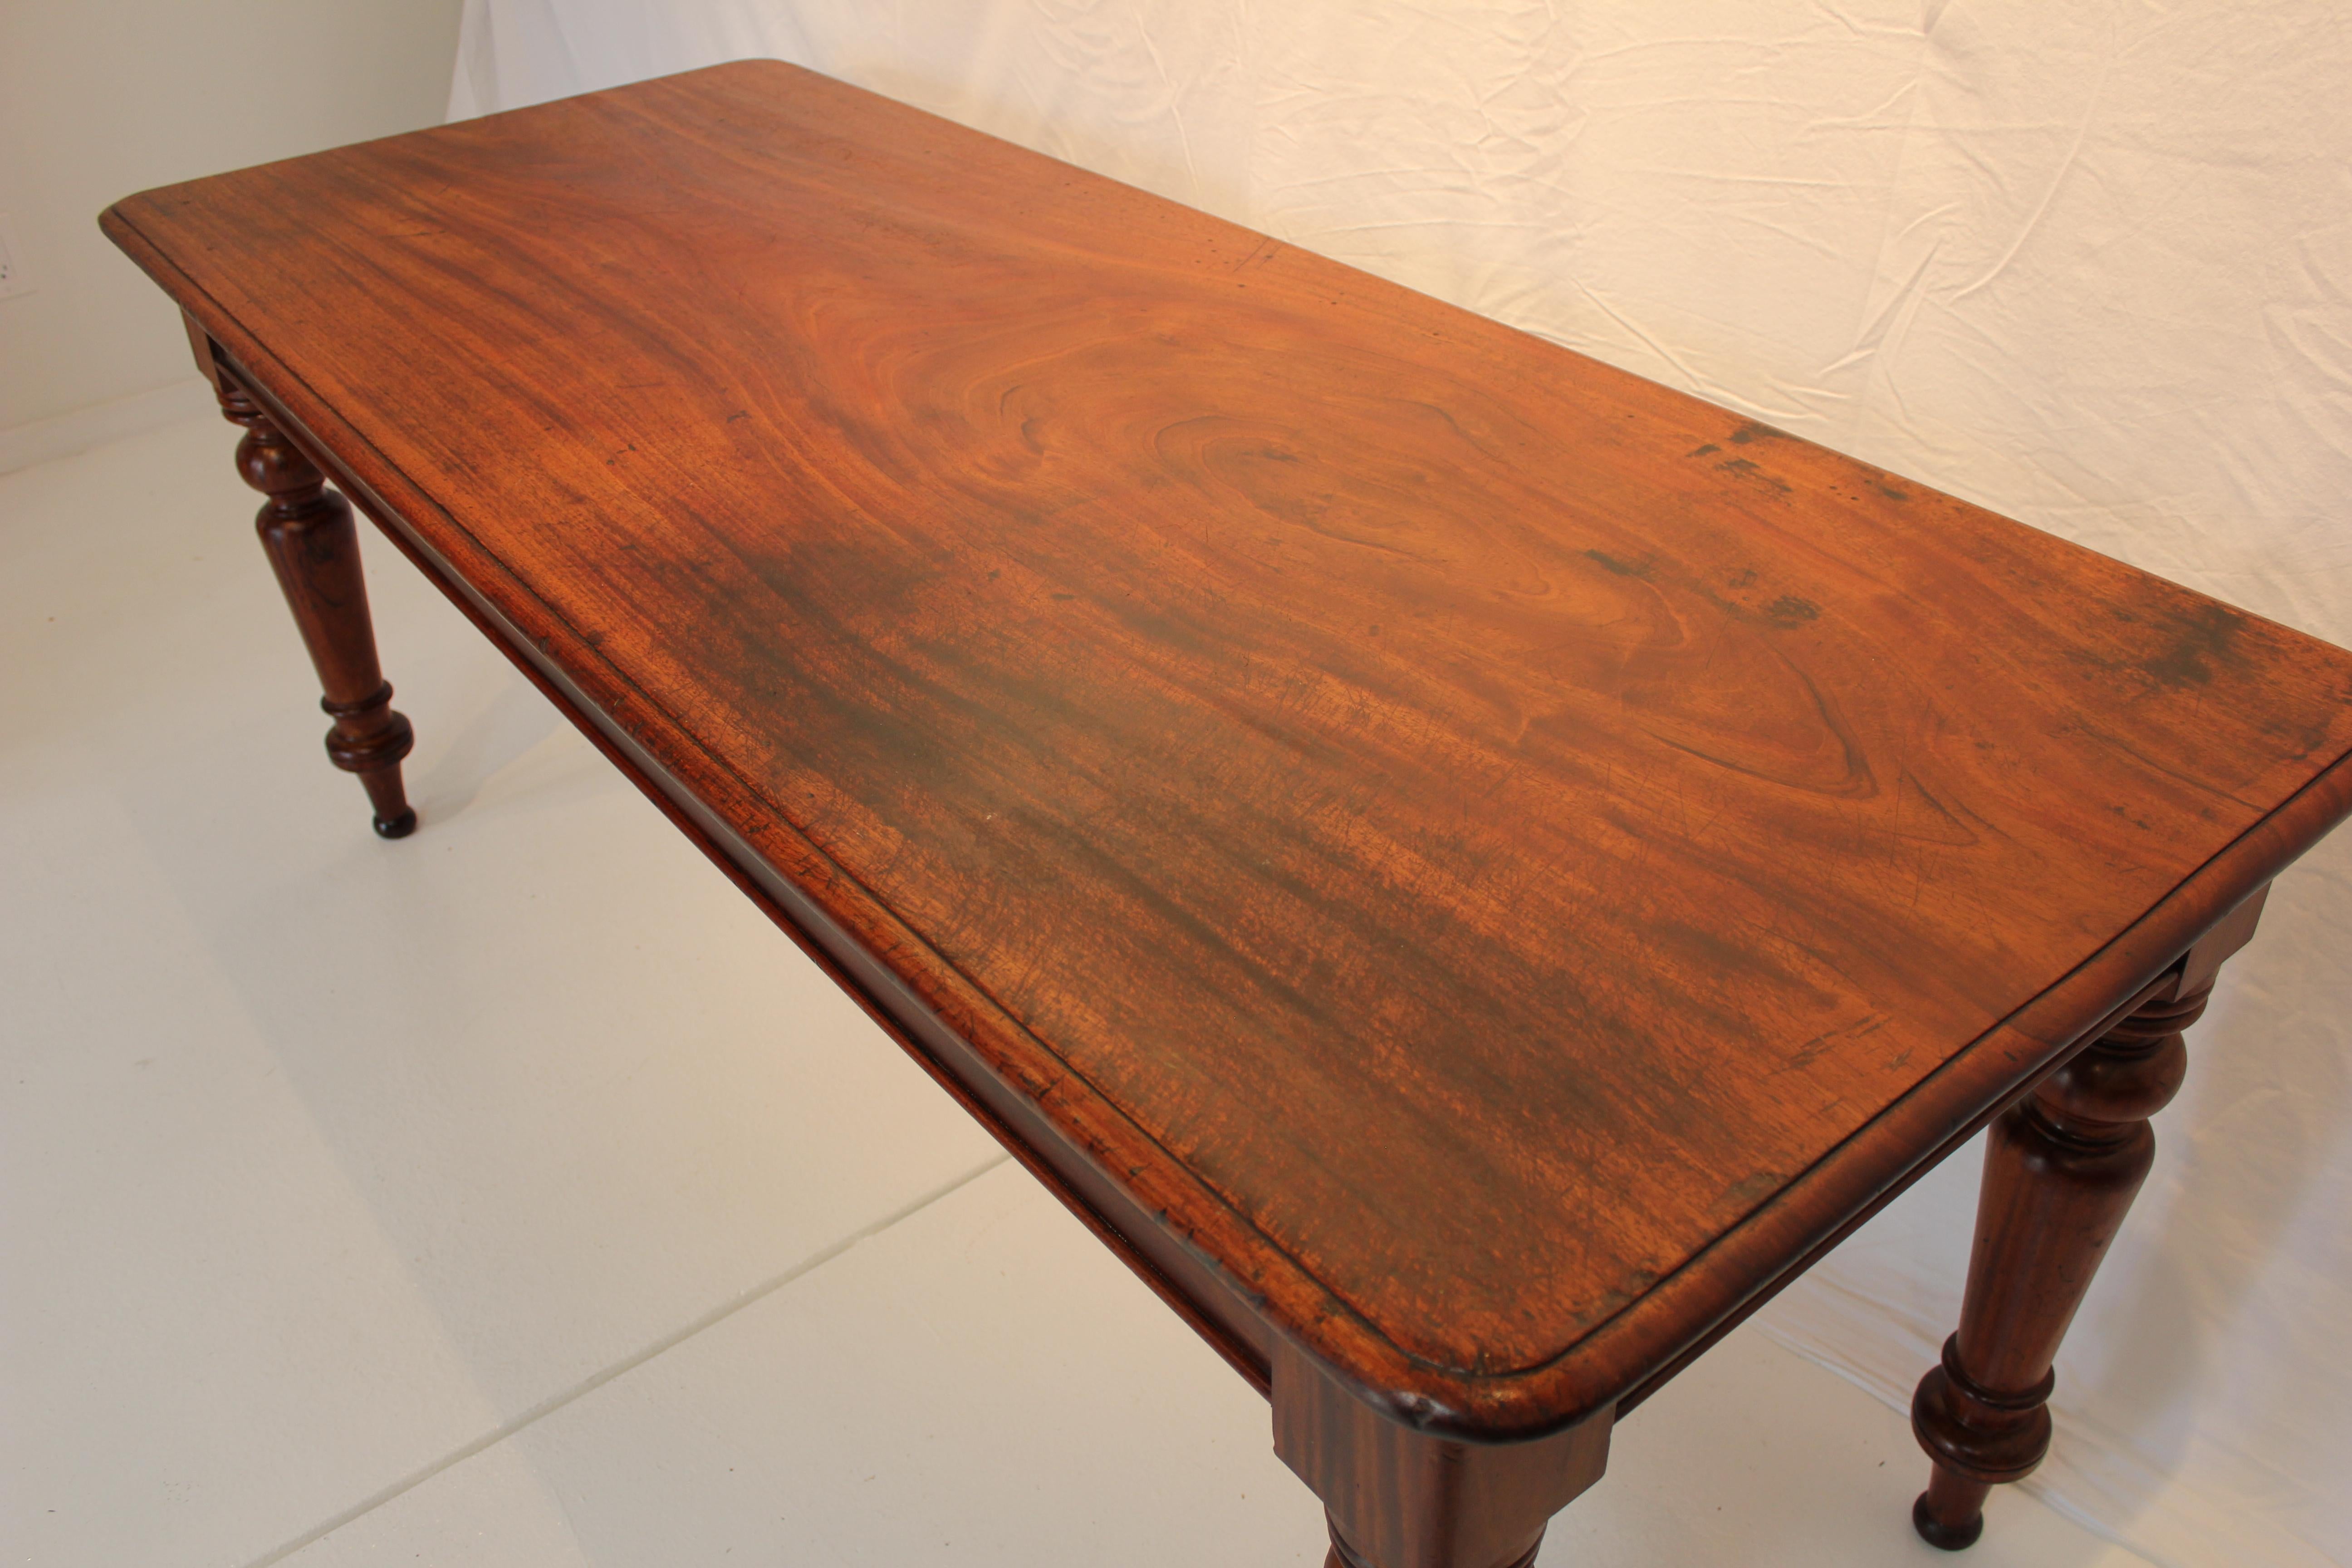 Antique American Mahogany Kitchen Dining Table 1 Plank Top Late 19th Century In Good Condition For Sale In Los Angeles, CA